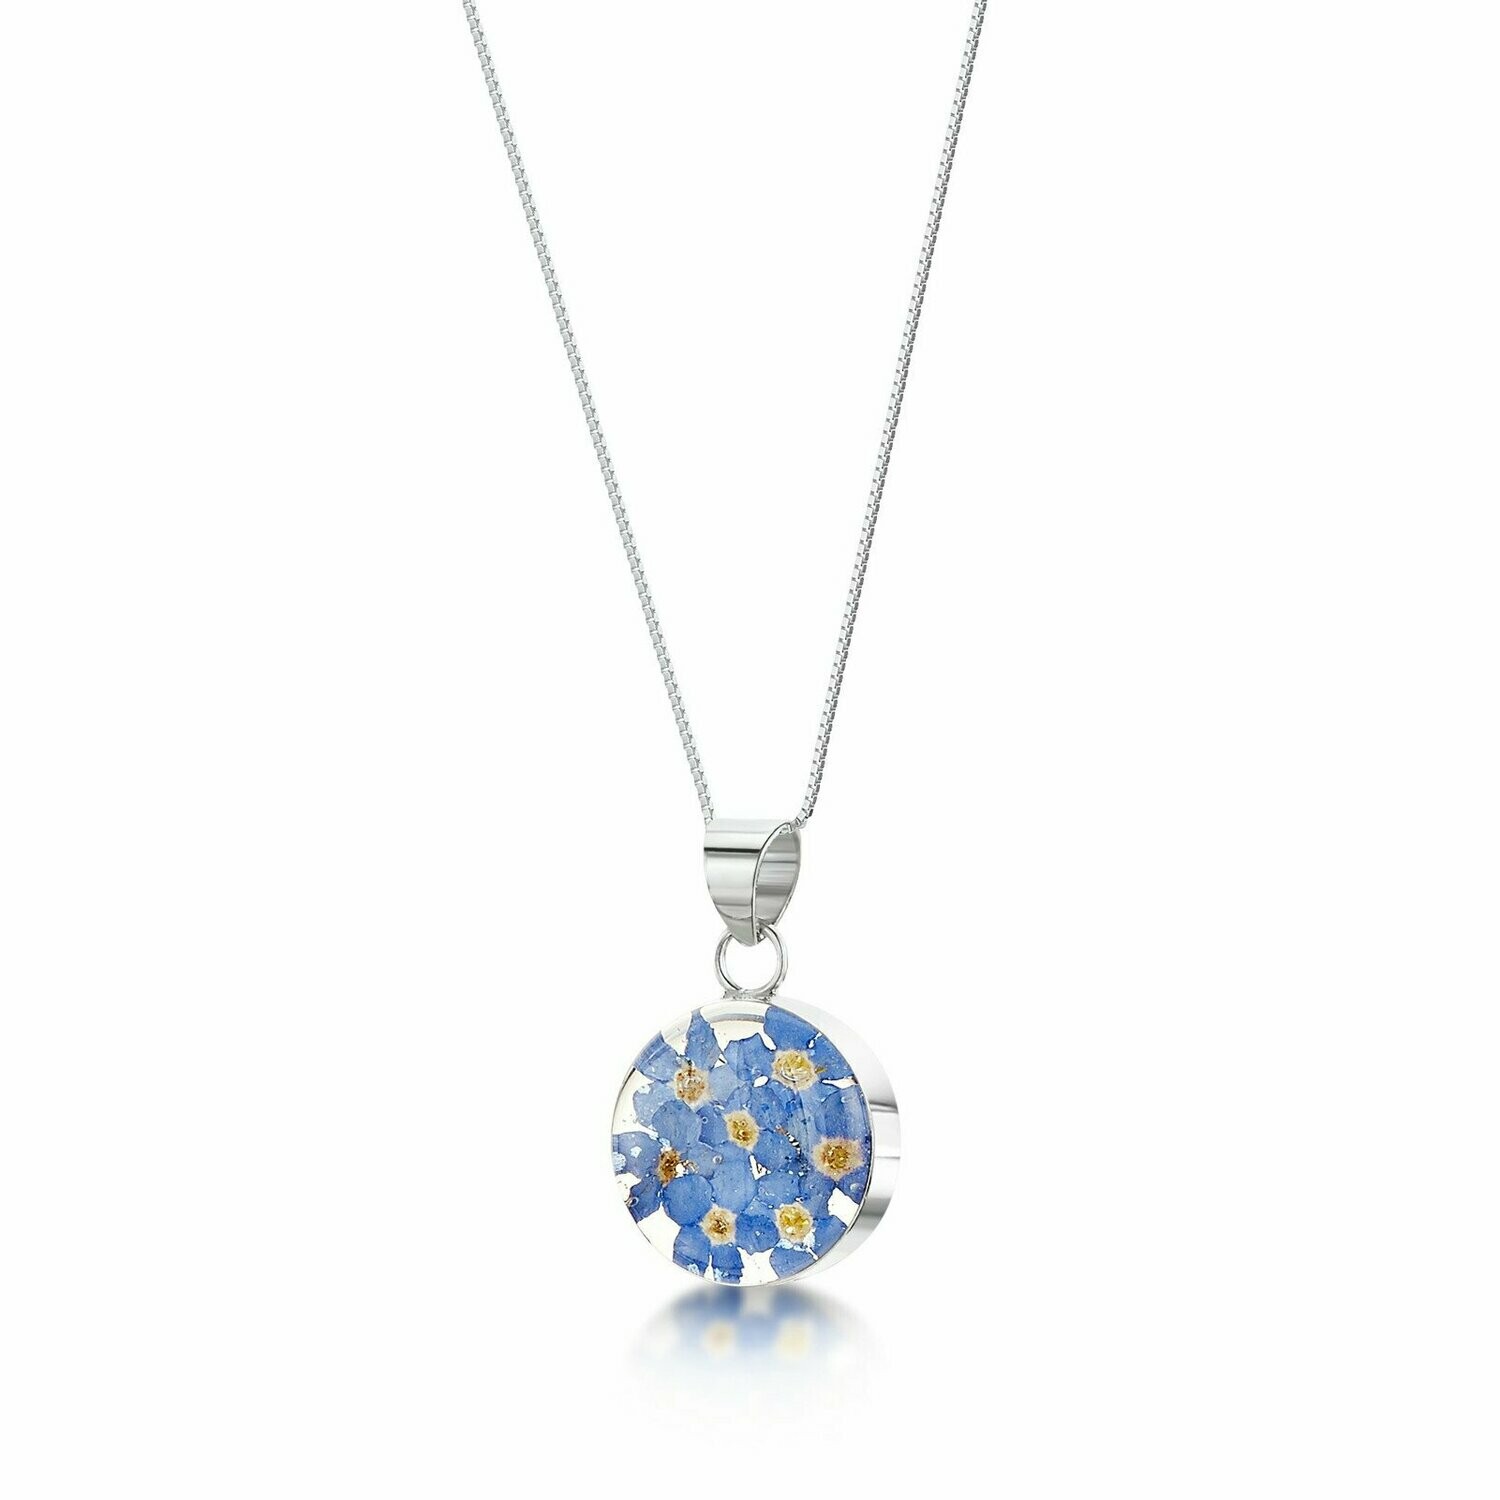 Silver Pendant - Forget-me-not - Round